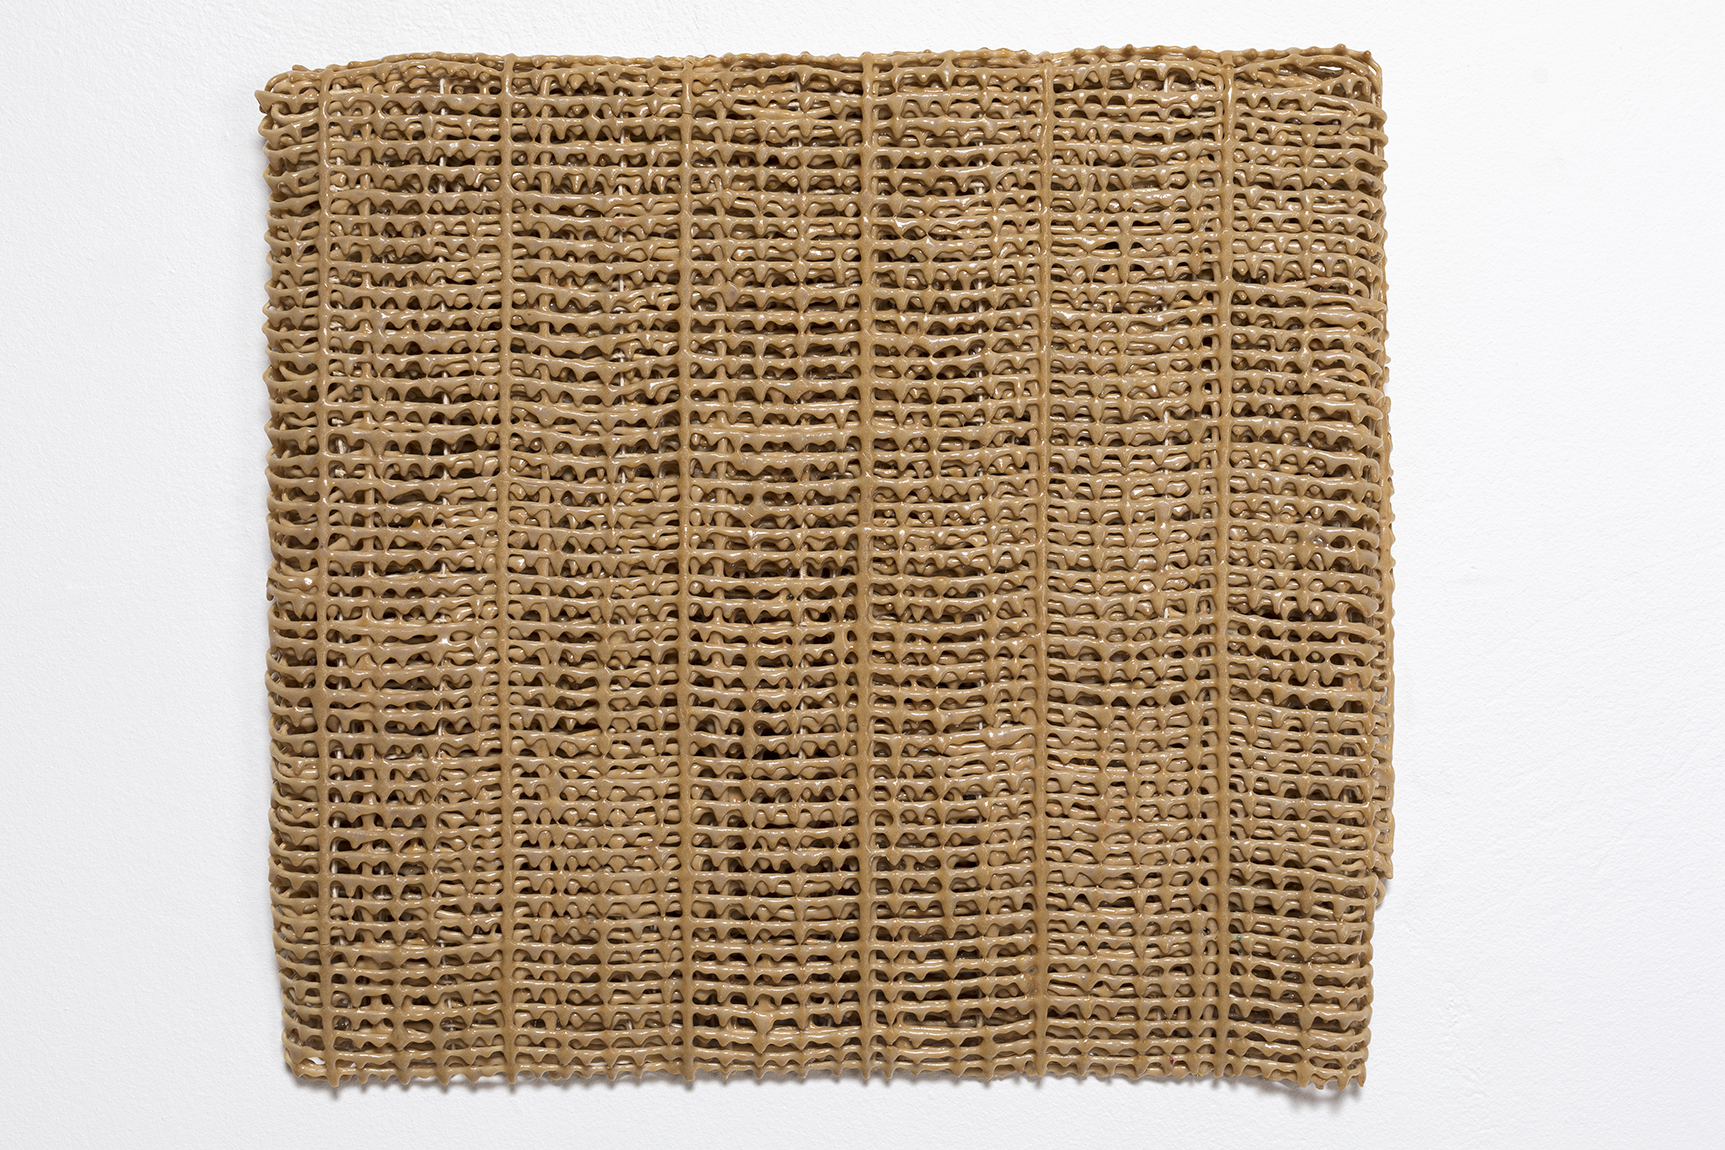 A muted brown distressed fabric-like acrylic on cotton thread resembling netting hanging on a white gallery wall